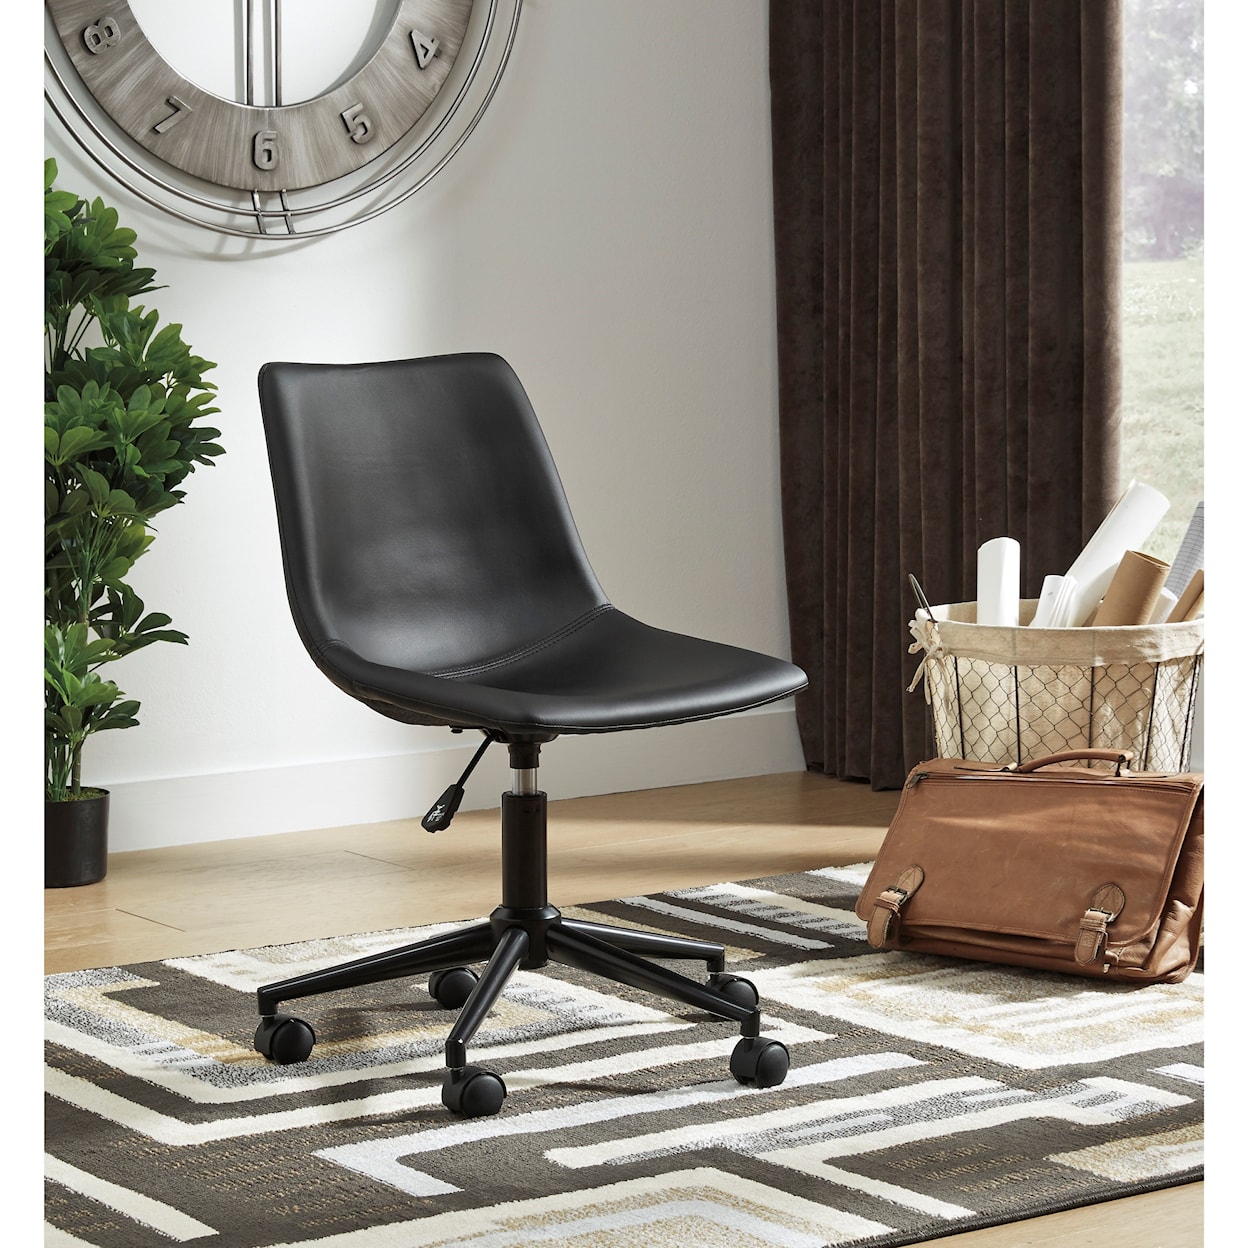 Signature Design by Ashley Furniture Office Chair Program Home Office Swivel Desk Chair